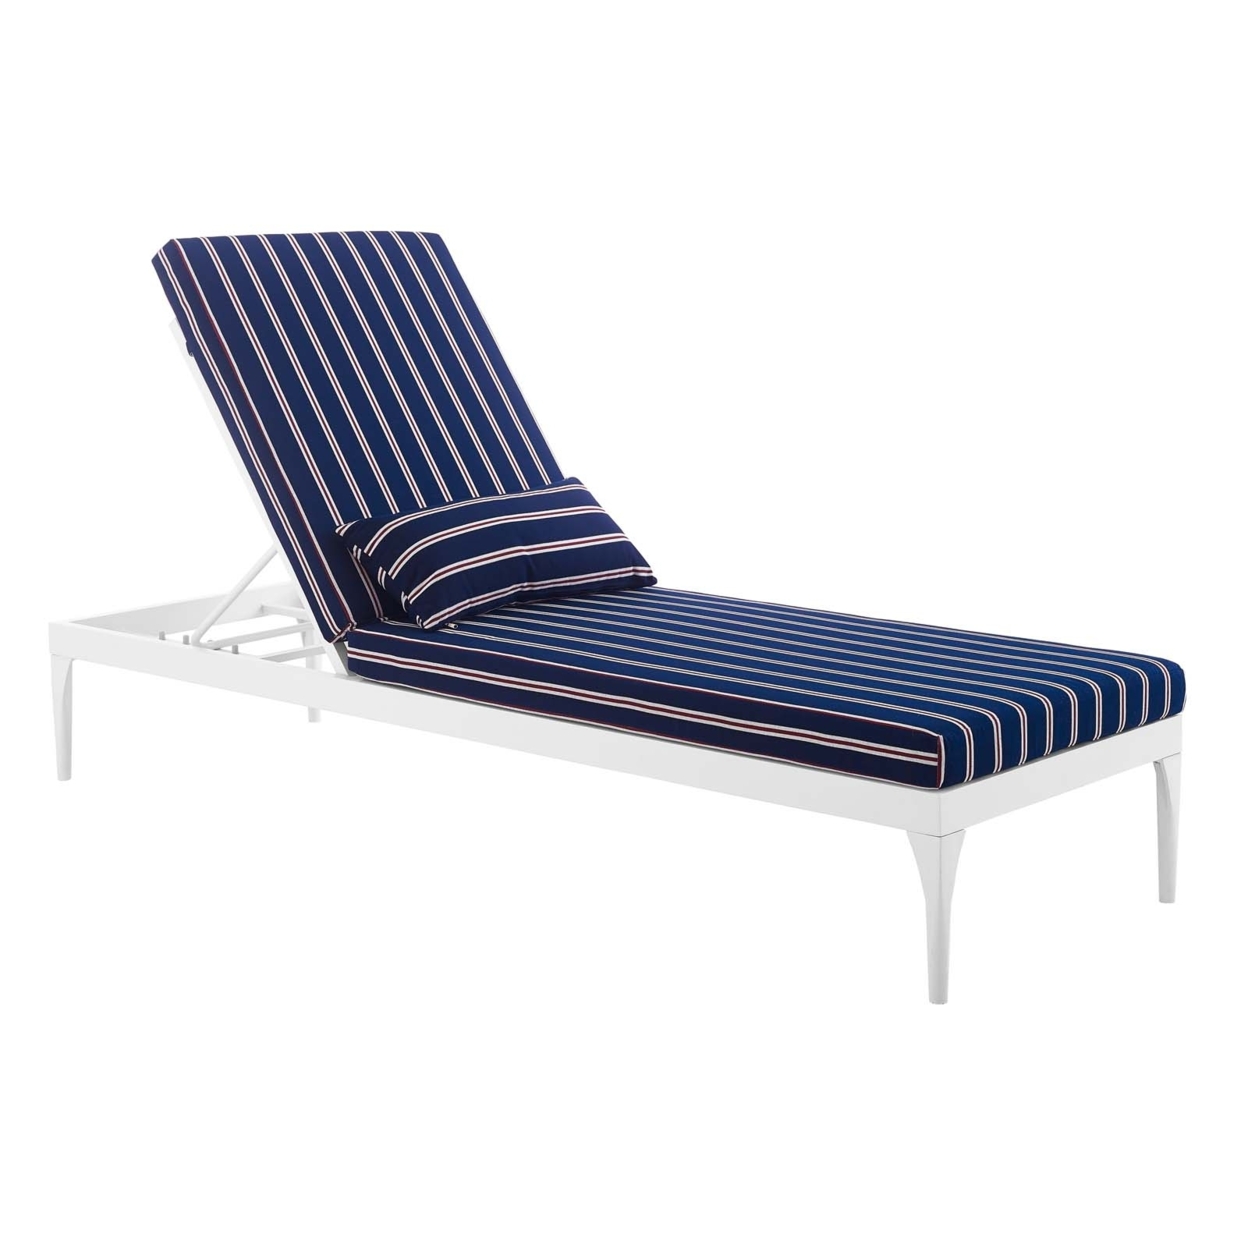 Perspective Cushion Outdoor Patio Chaise Lounge Chair,White Striped Navy